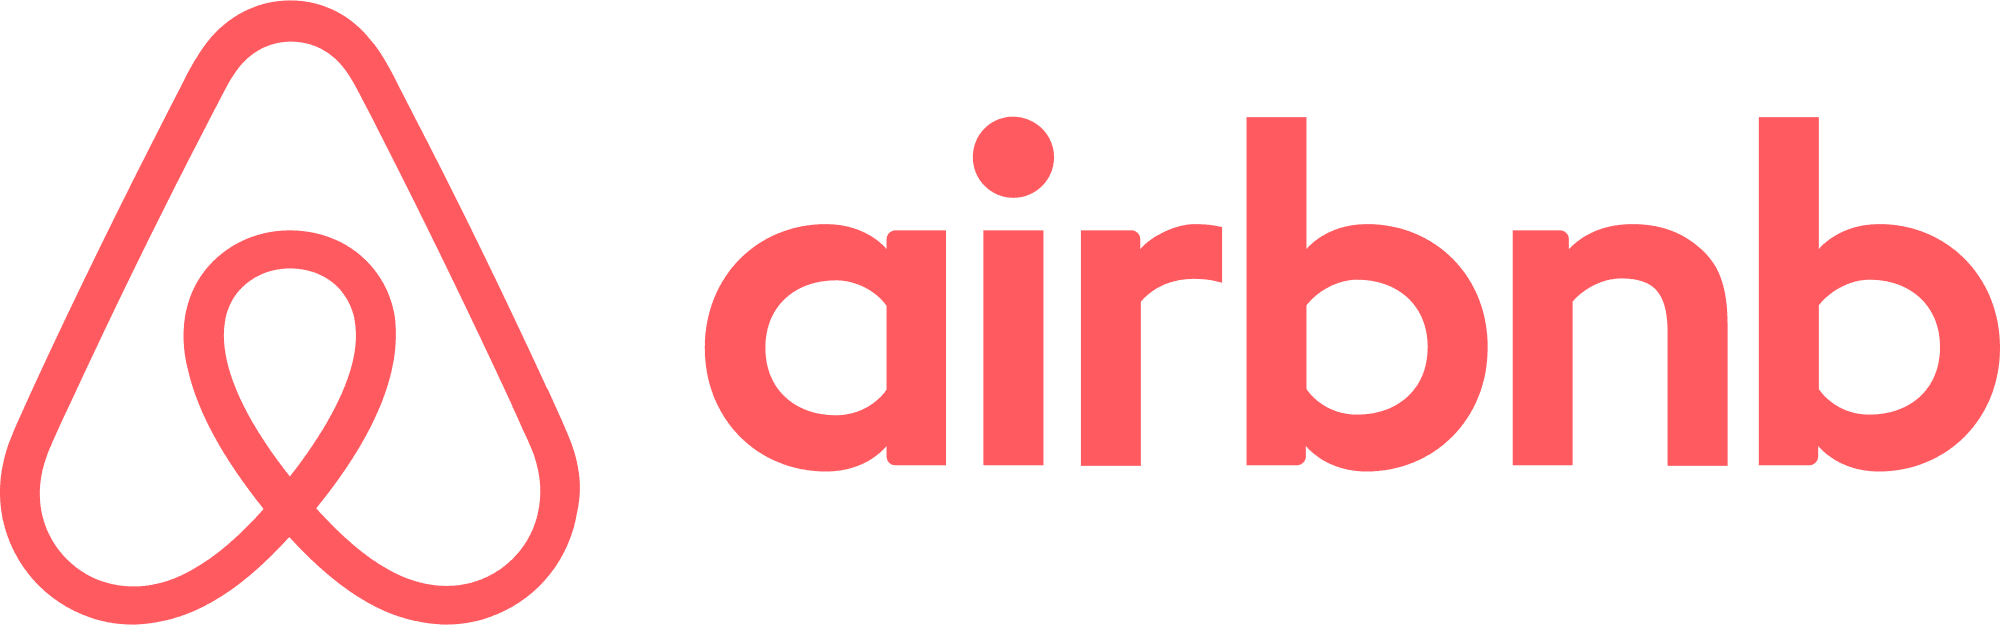 letzi logo of airbnb connection